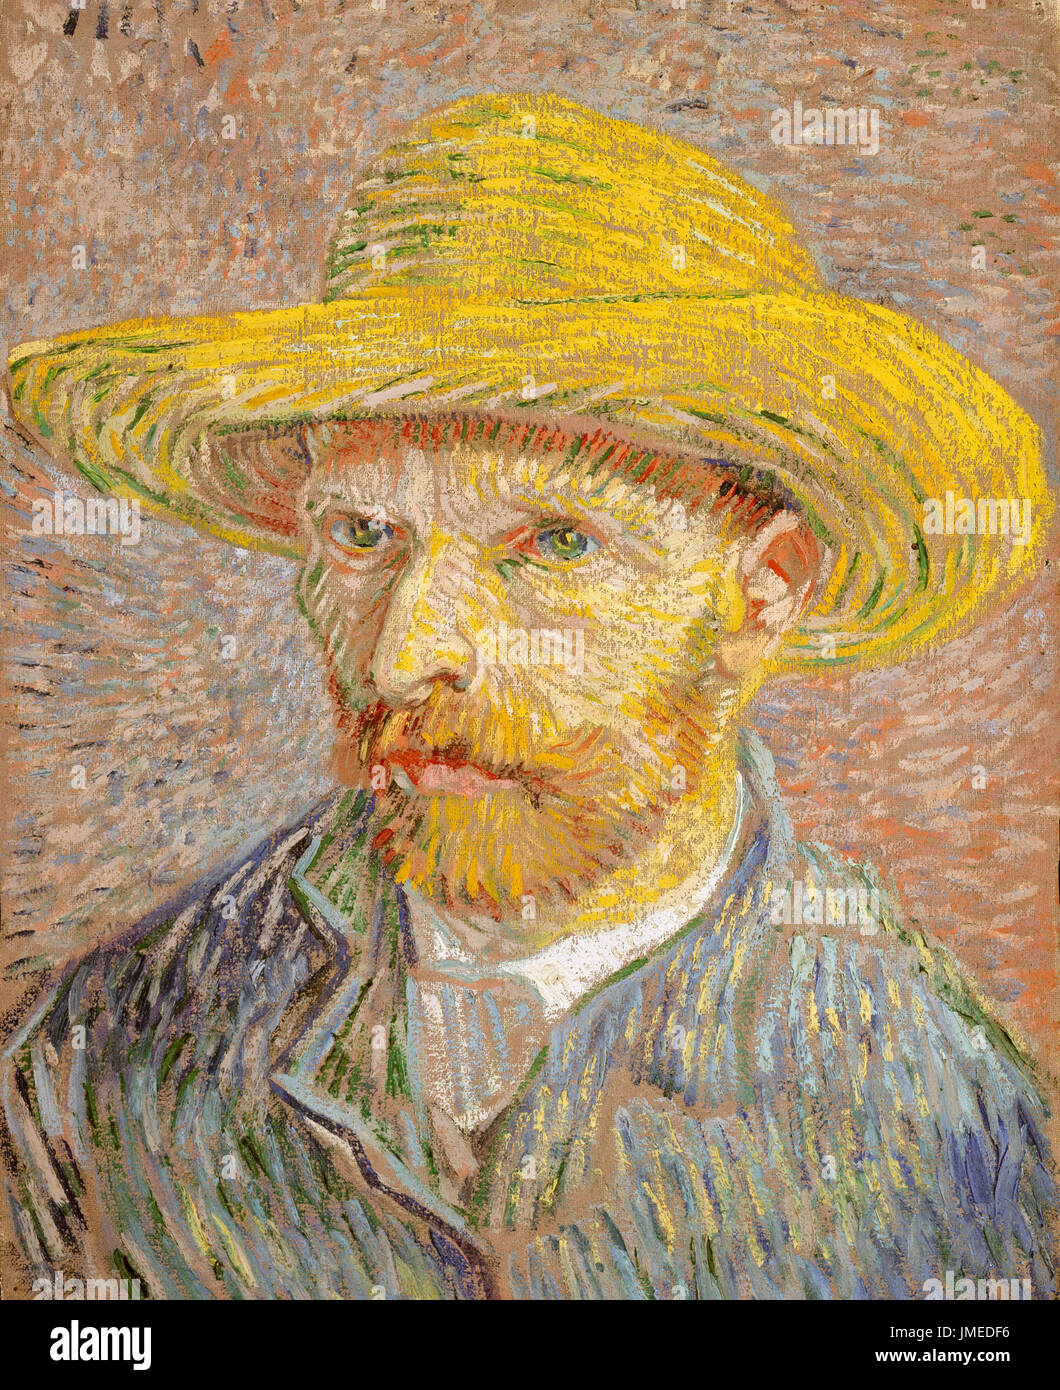 Vincent van Gogh's 'Self-Portrait with a Straw Hat' oil painting on canvas from 1887. Van Gogh's 'The Potato Peeler' is on the obverse of this portrait. Stock Photo